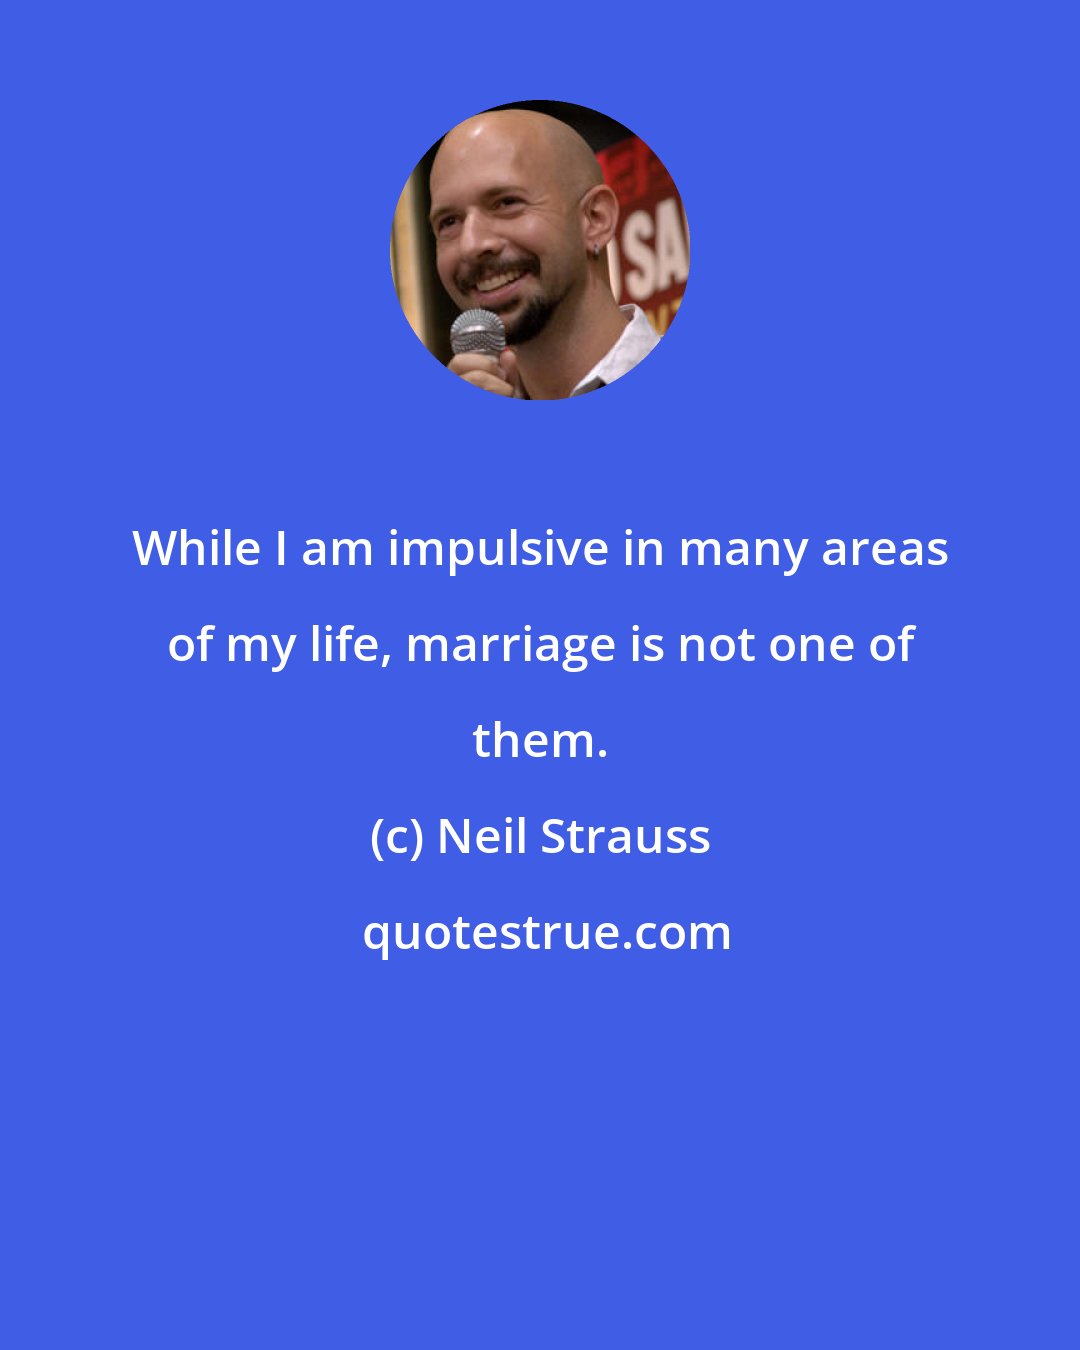 Neil Strauss: While I am impulsive in many areas of my life, marriage is not one of them.